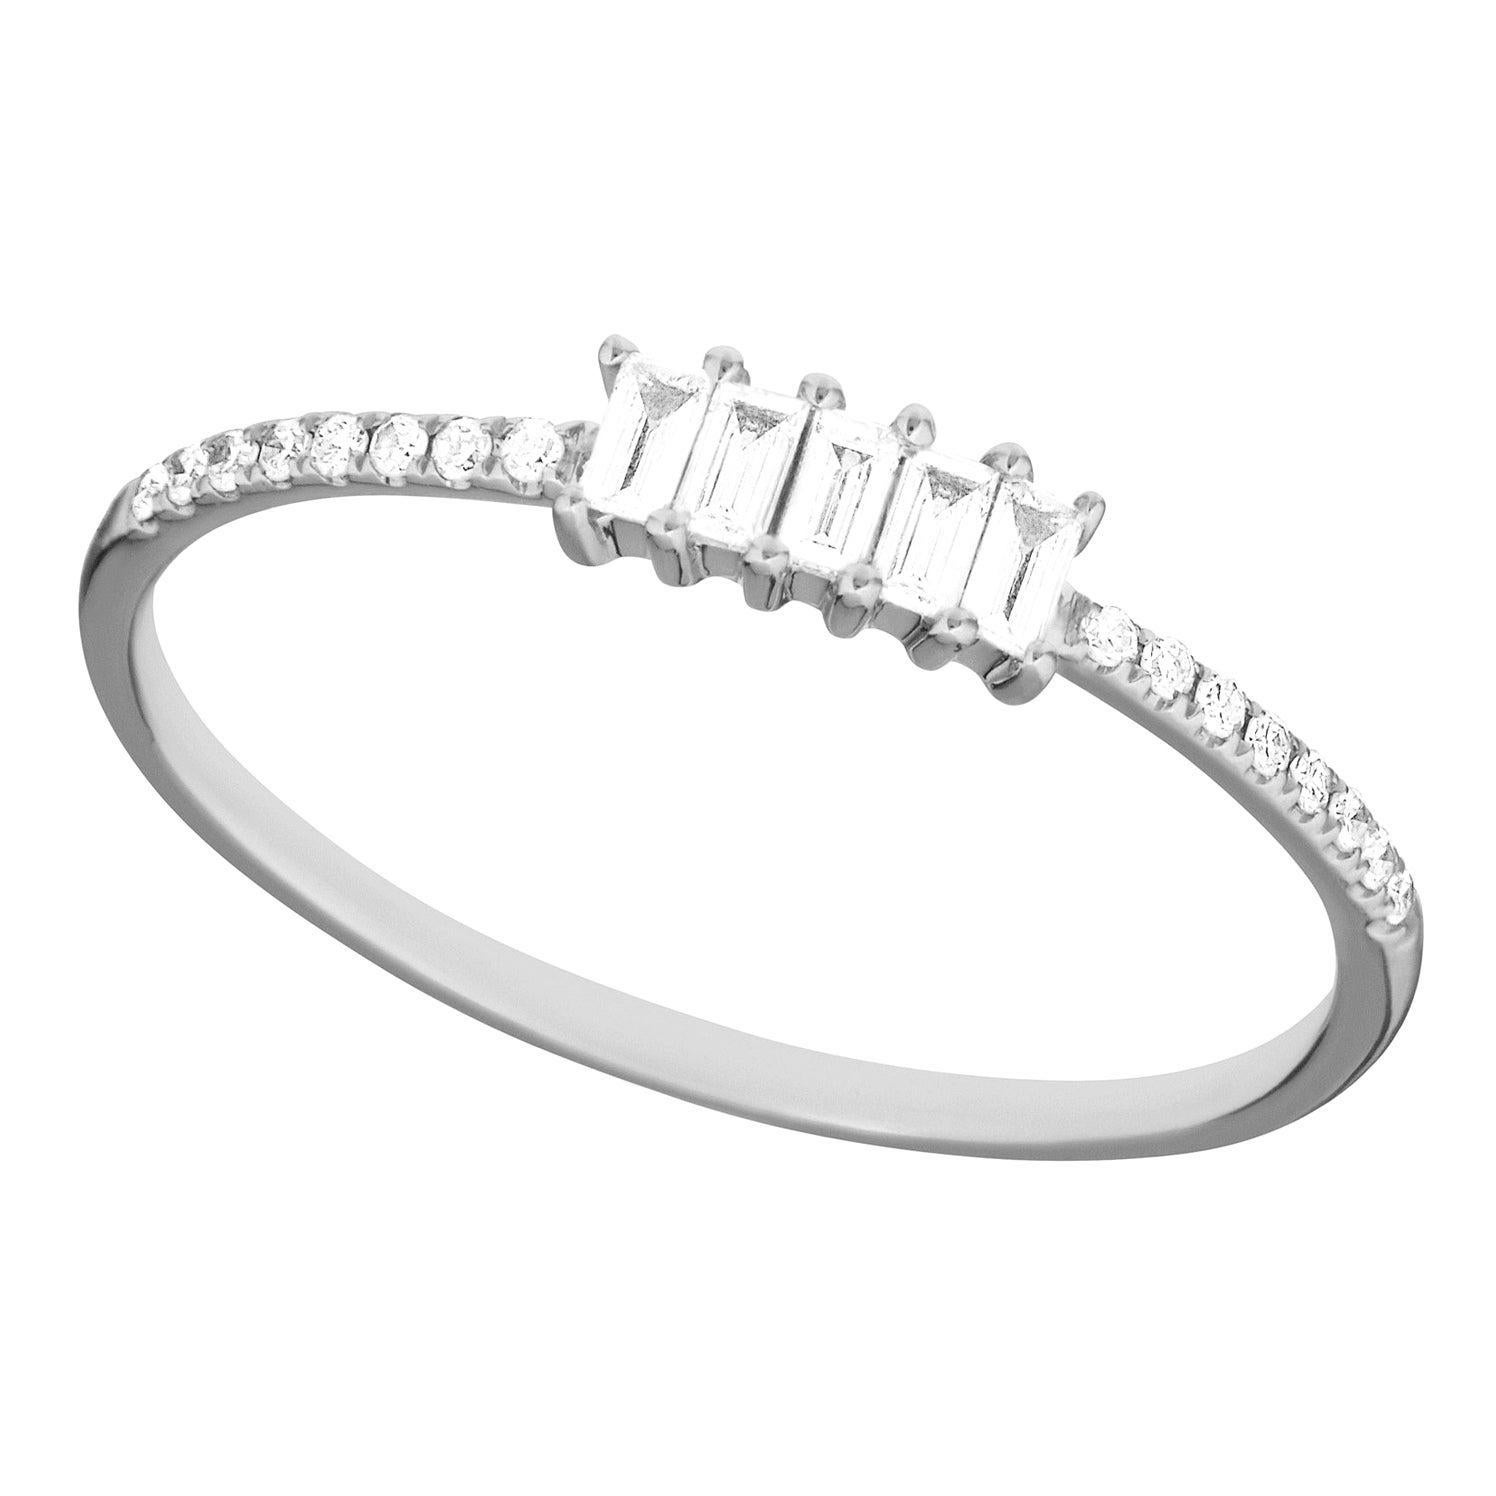 For Sale:  14 Karat White Gold 0.145 Carat Round and Baguette Diamond Band Ring